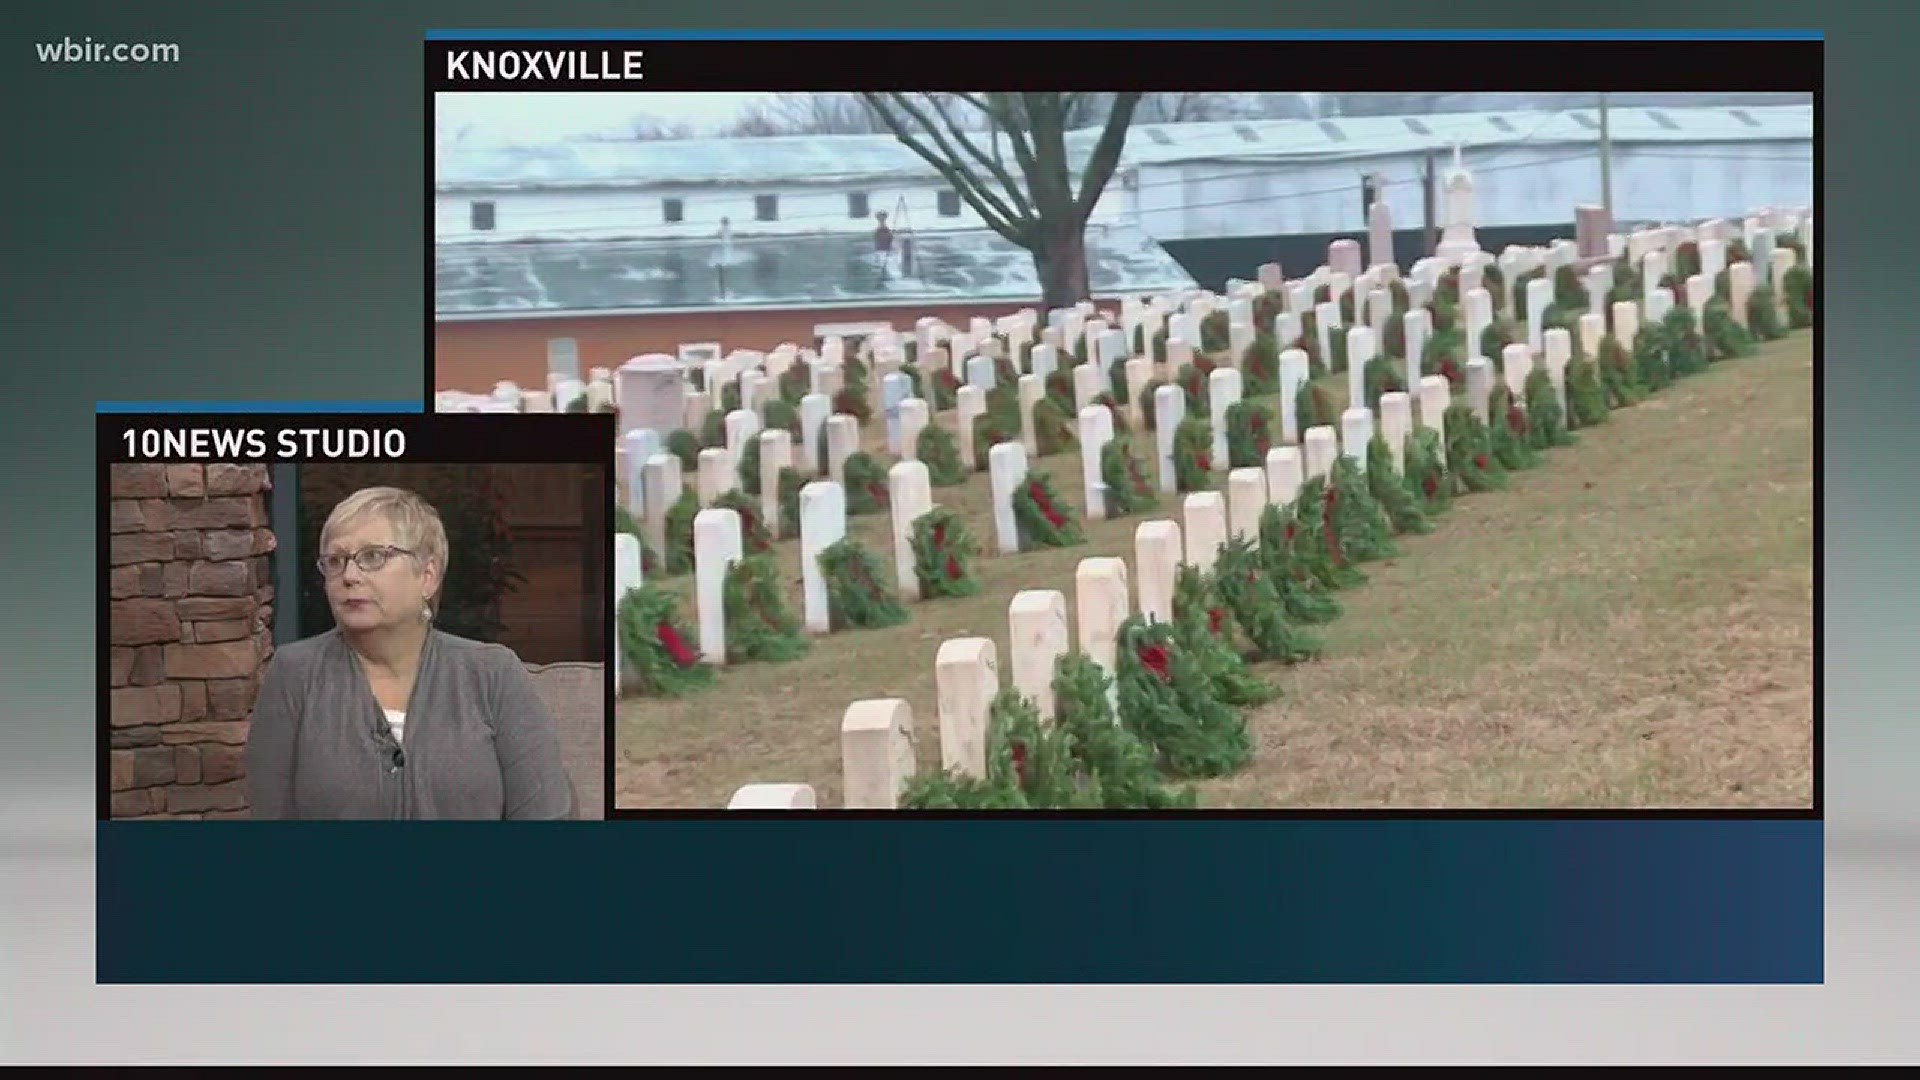 Each year, Knoxville honors veterans buried in Knox County cemeteries by placing a wreath on each grave, but the program needs your help.